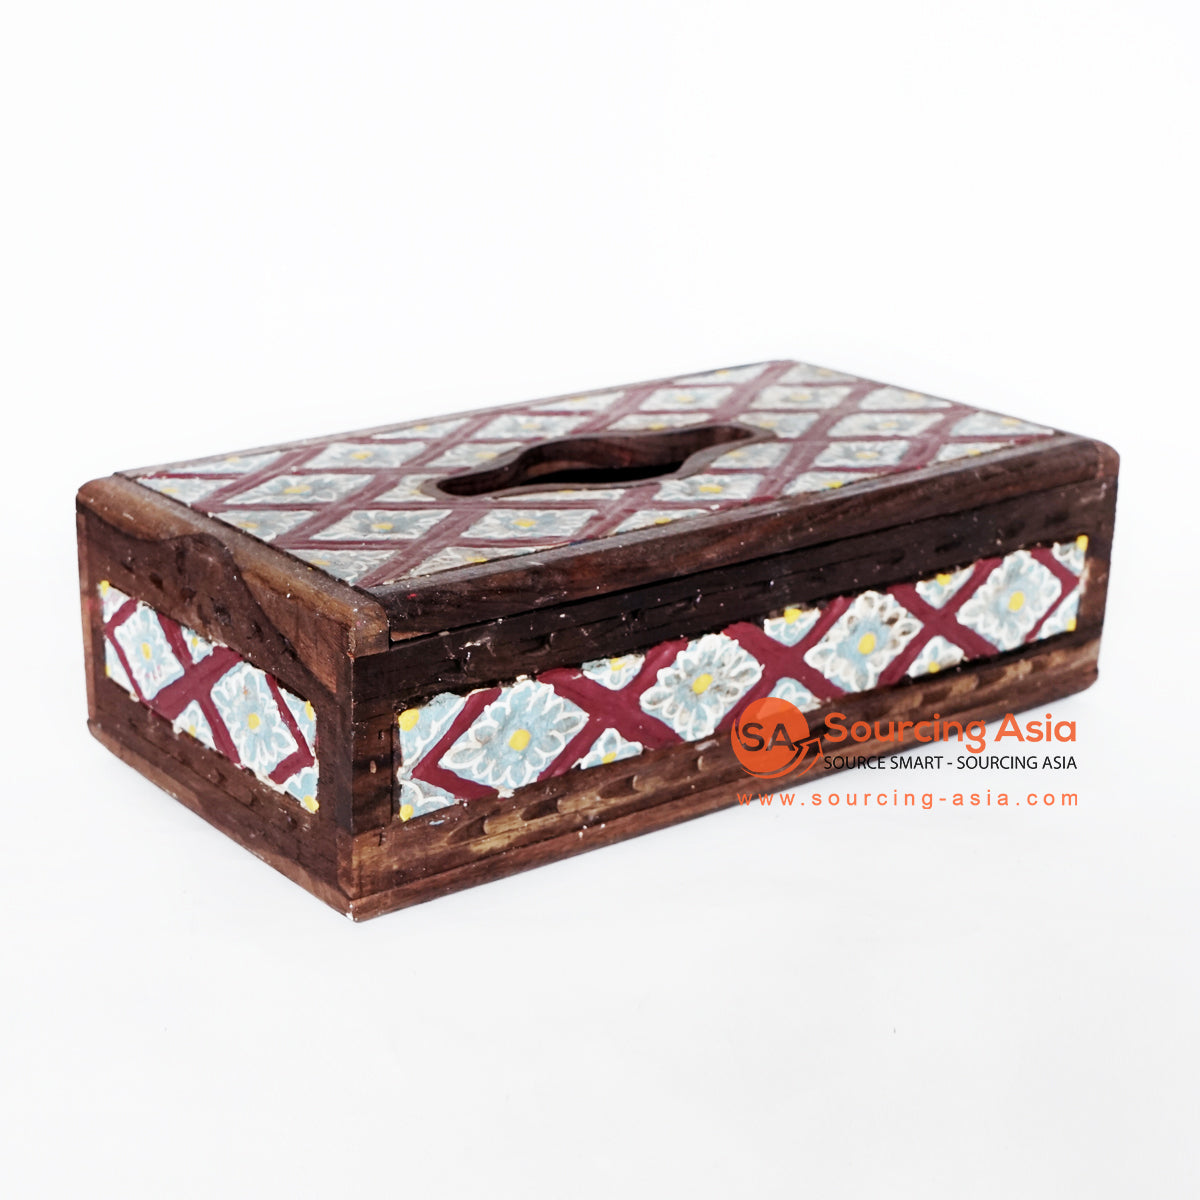 MANC076 RED AND BLUE WOODEN FLOWER CARVED RECTANGULAR TISSUE BOX